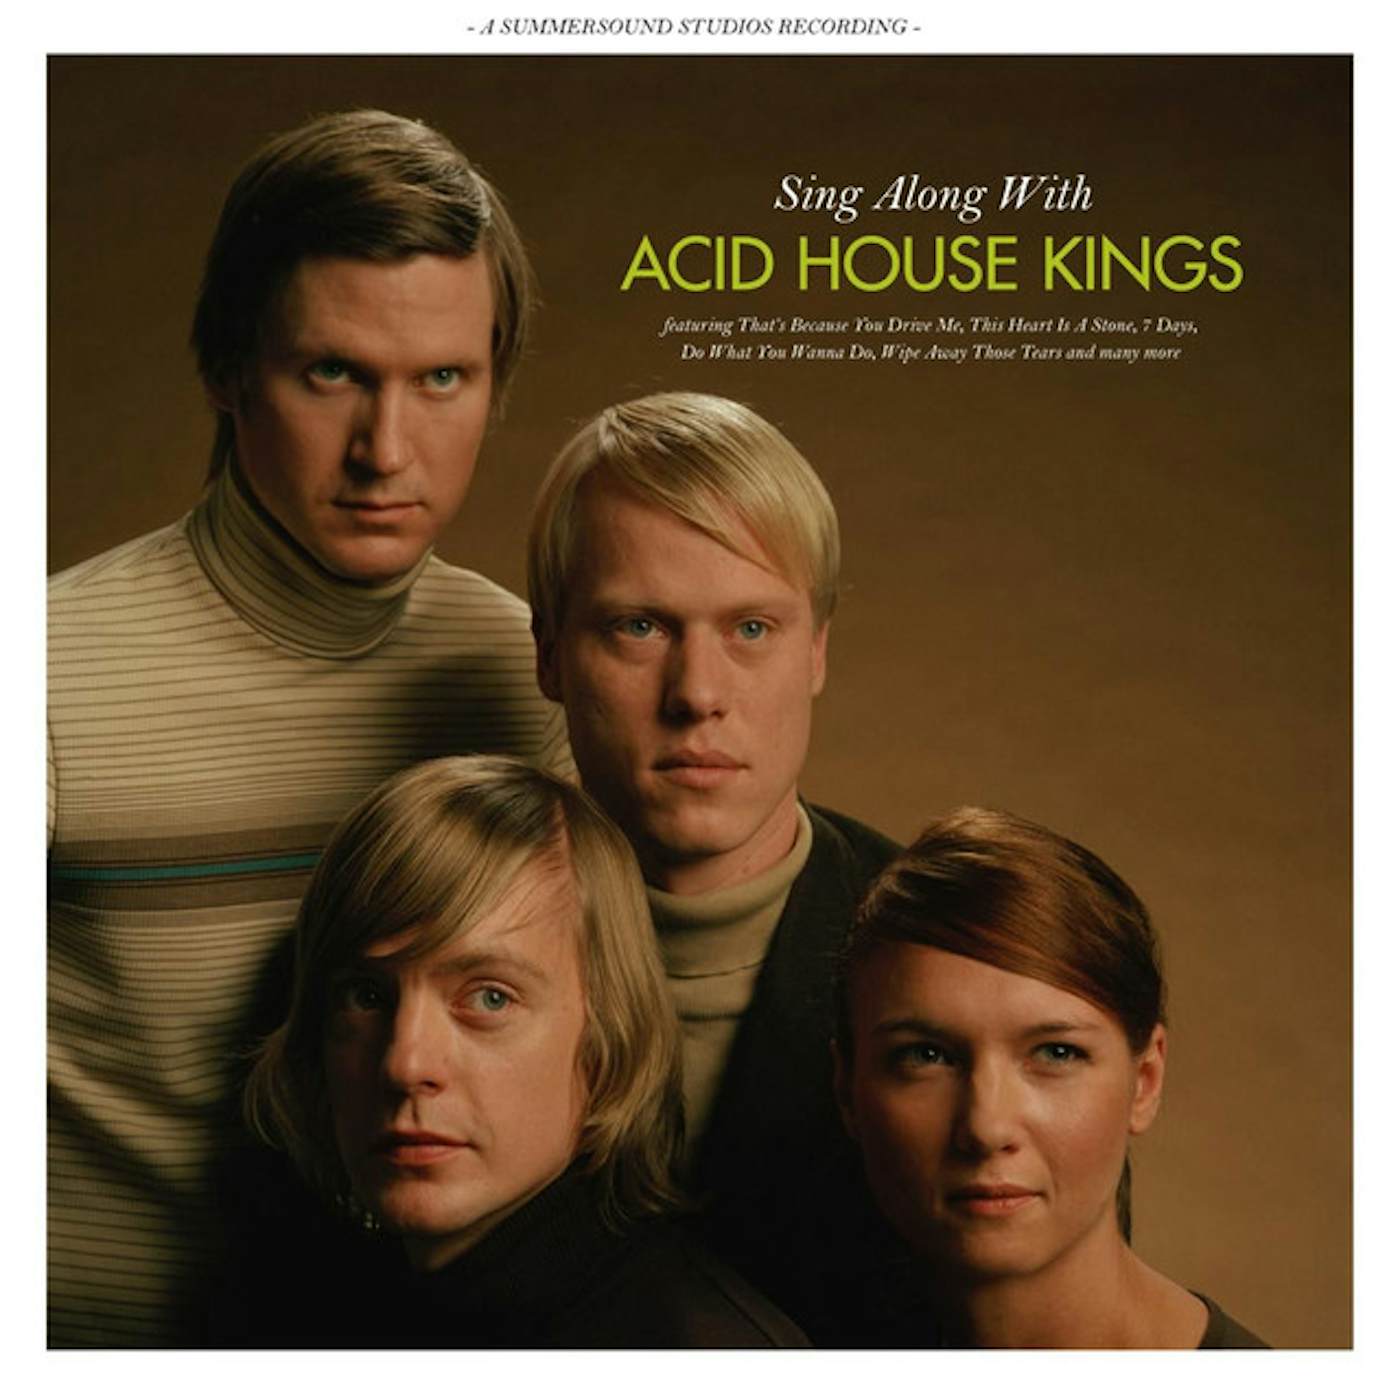 Sing Along With Acid House Kings Vinyl Record